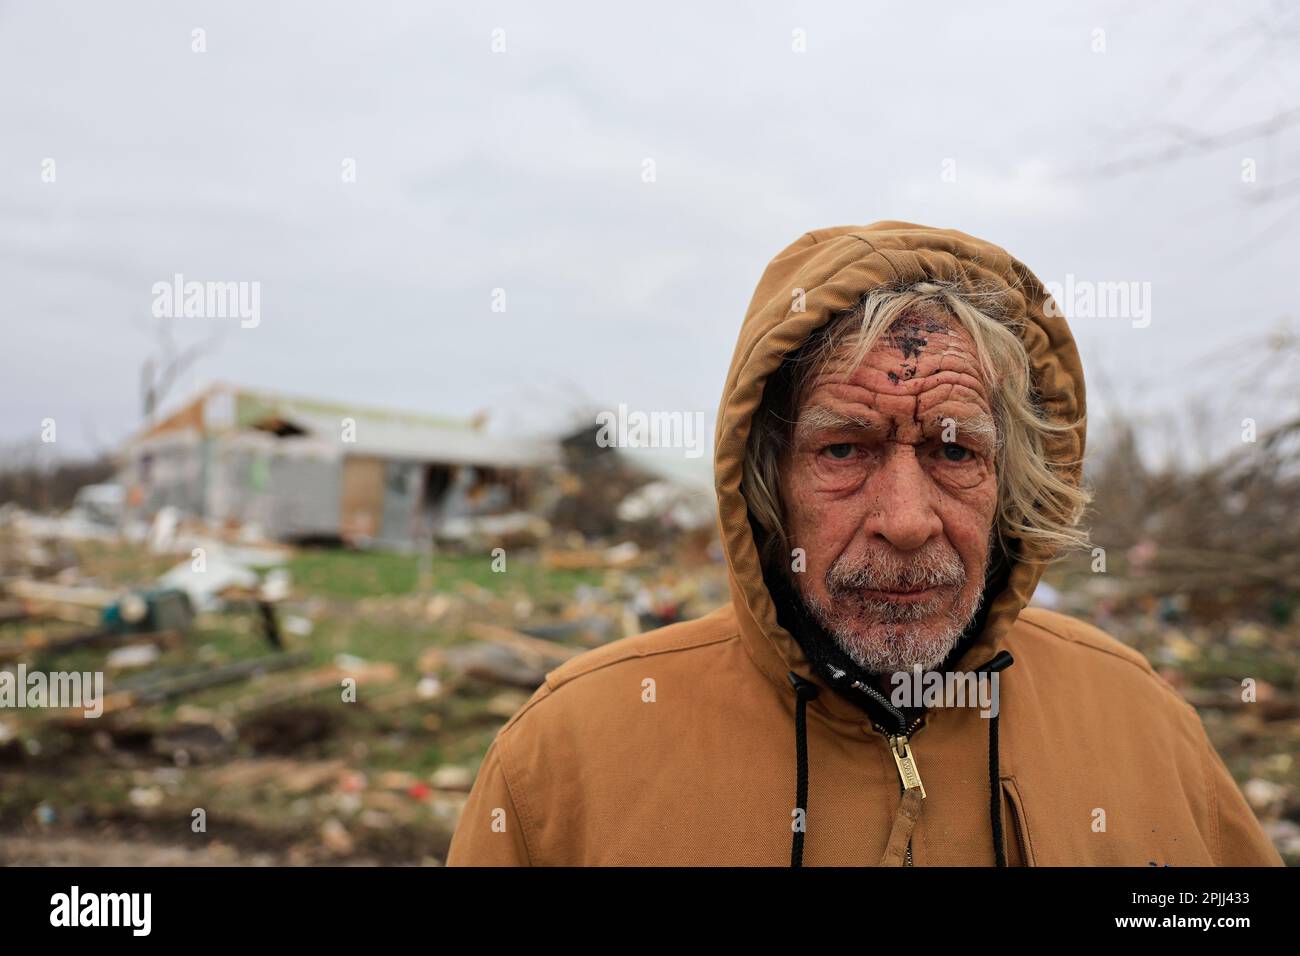 SULLIVAN, INDIANA - APRIL 1: Calvin Cox, who said he doesn't have  homeowners insurance, lost his home, his vehicles, and got injured by glass  during a tornado on April 1, 2023 in